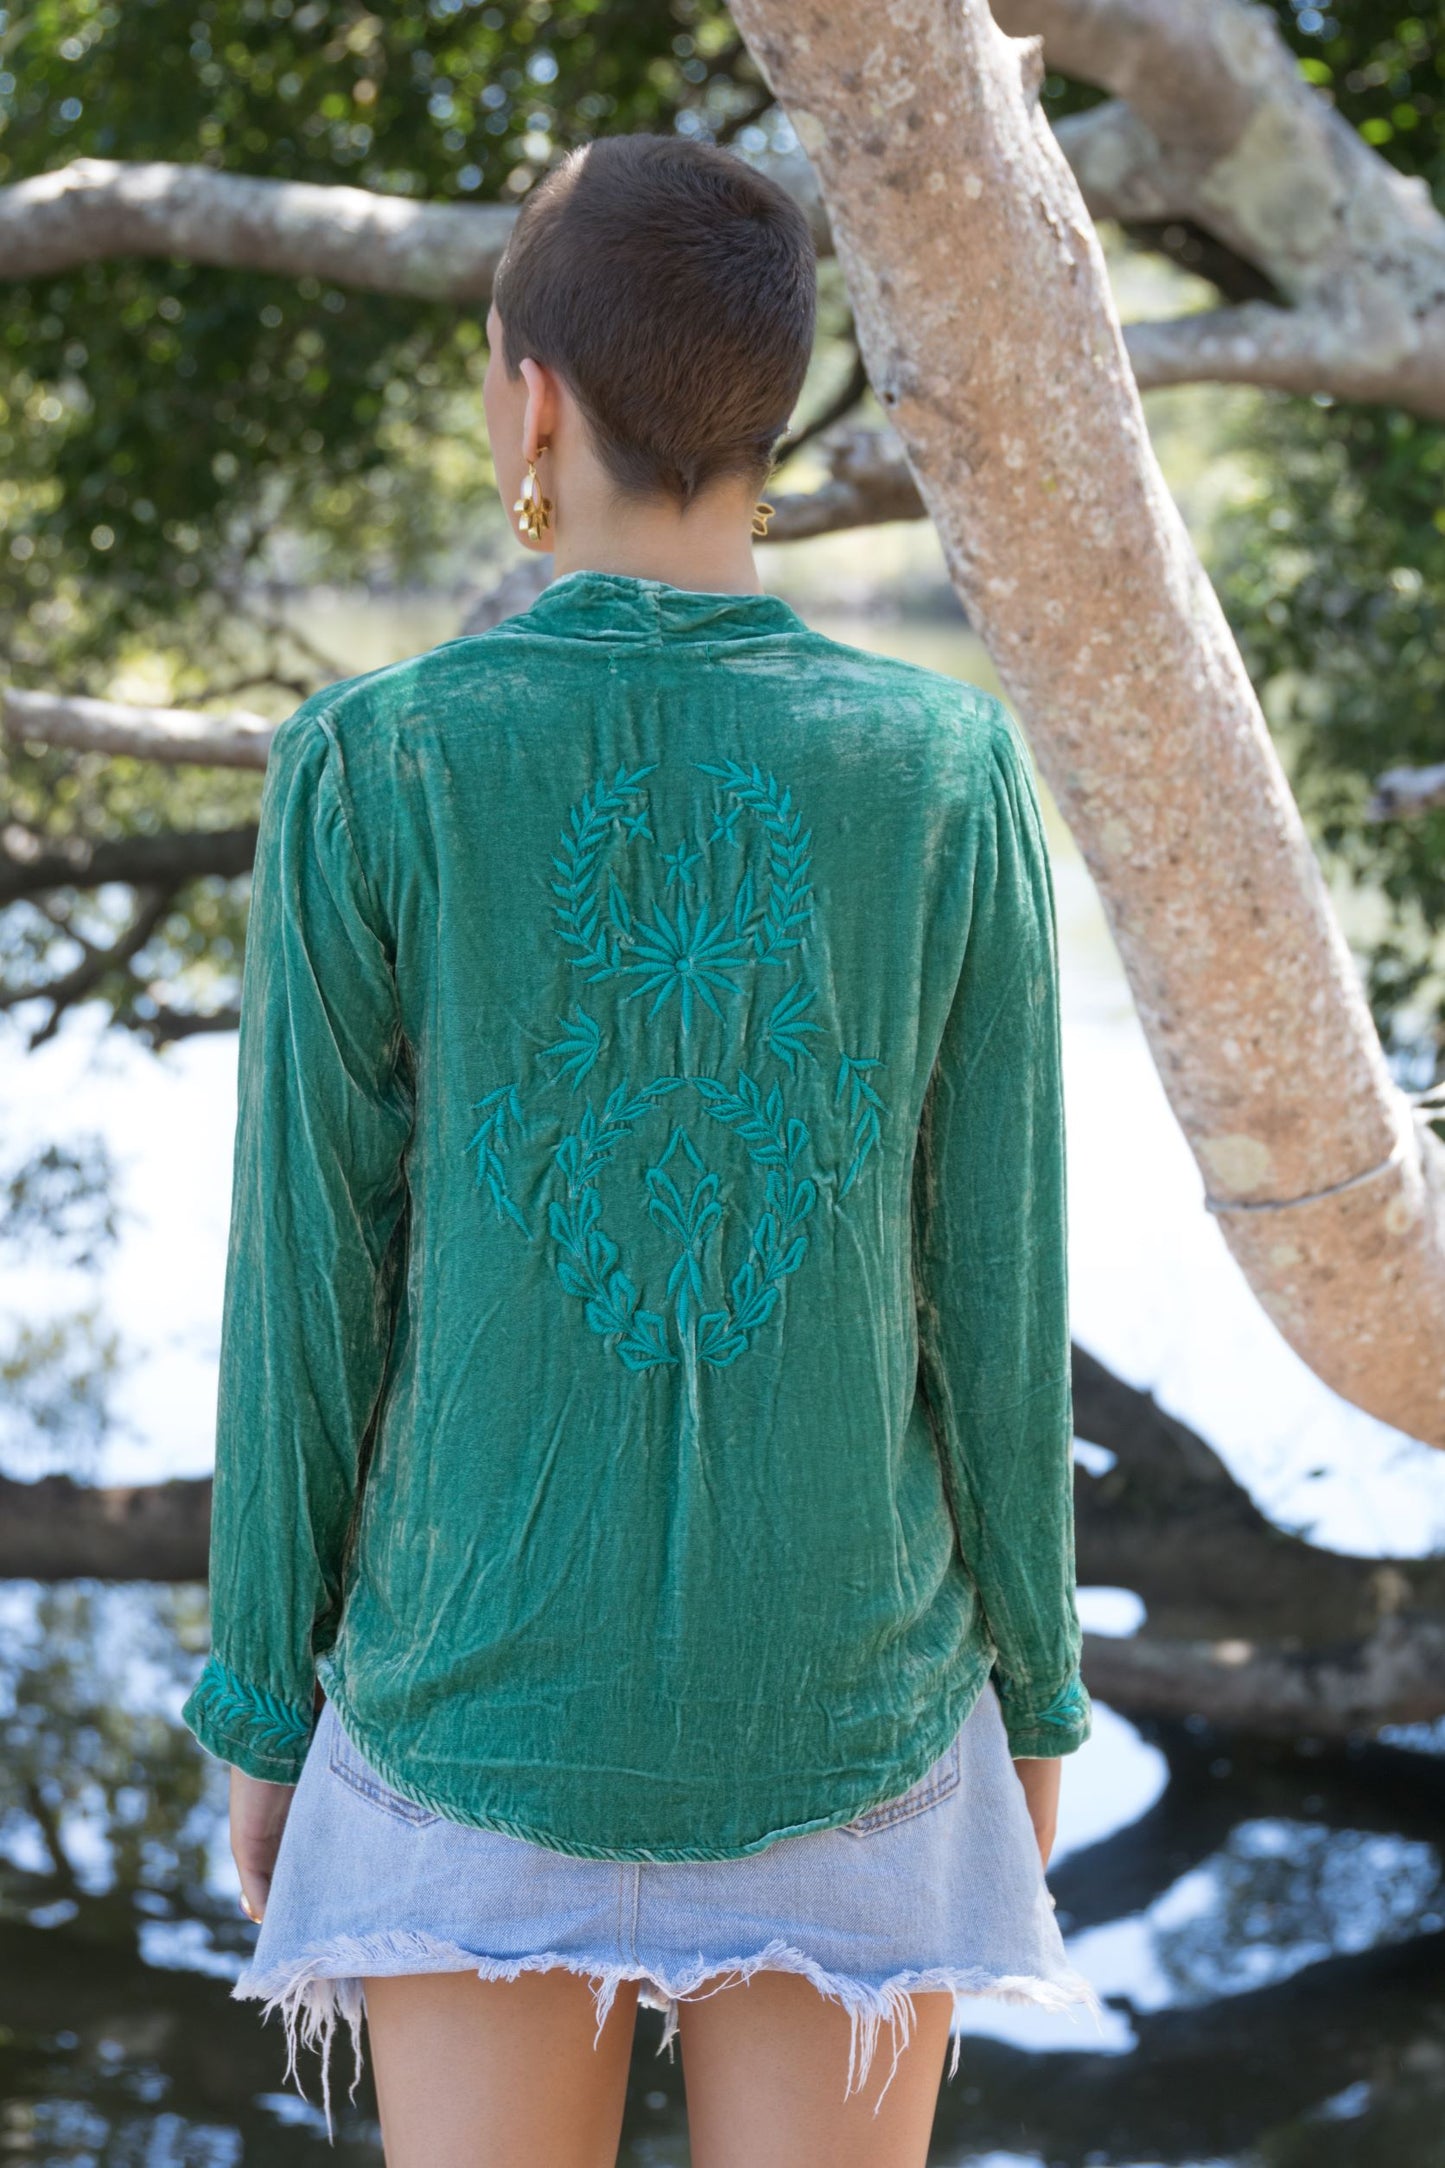 Rear of silk velvet jacket showing embroidery detail